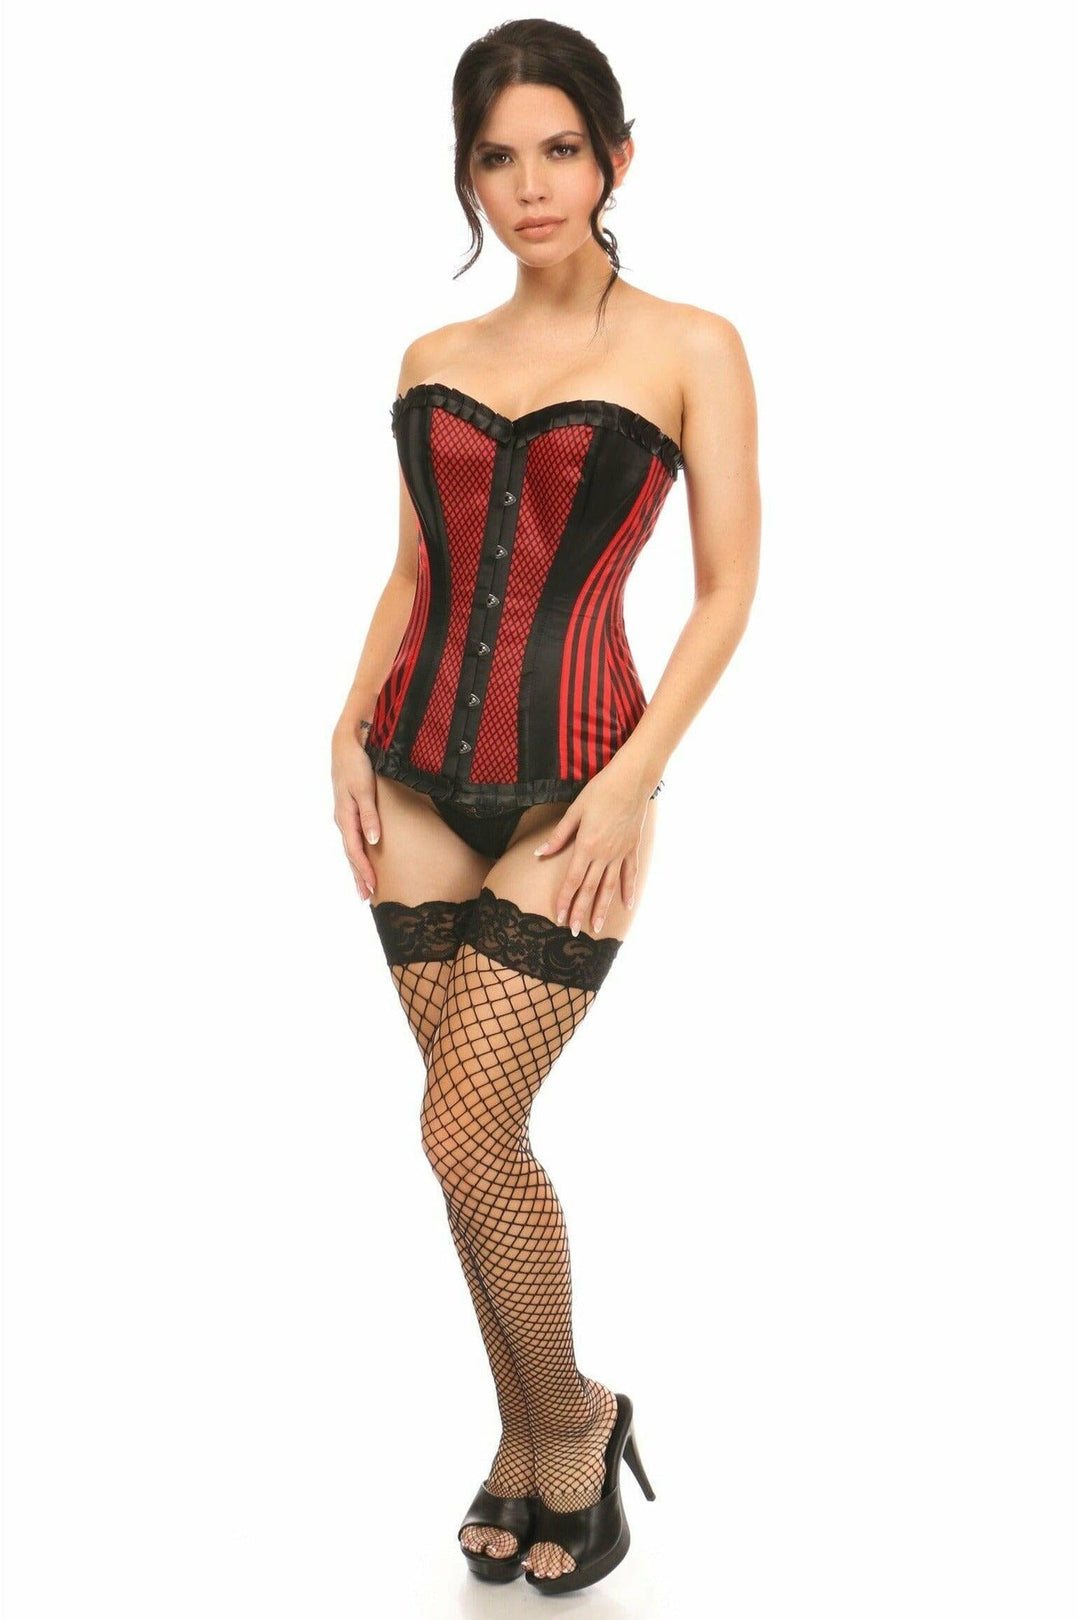 Lavish Red Burlesque Overbust Corset-Overbust Corsets-Daisy Corsets-SEXYSHOES.COM